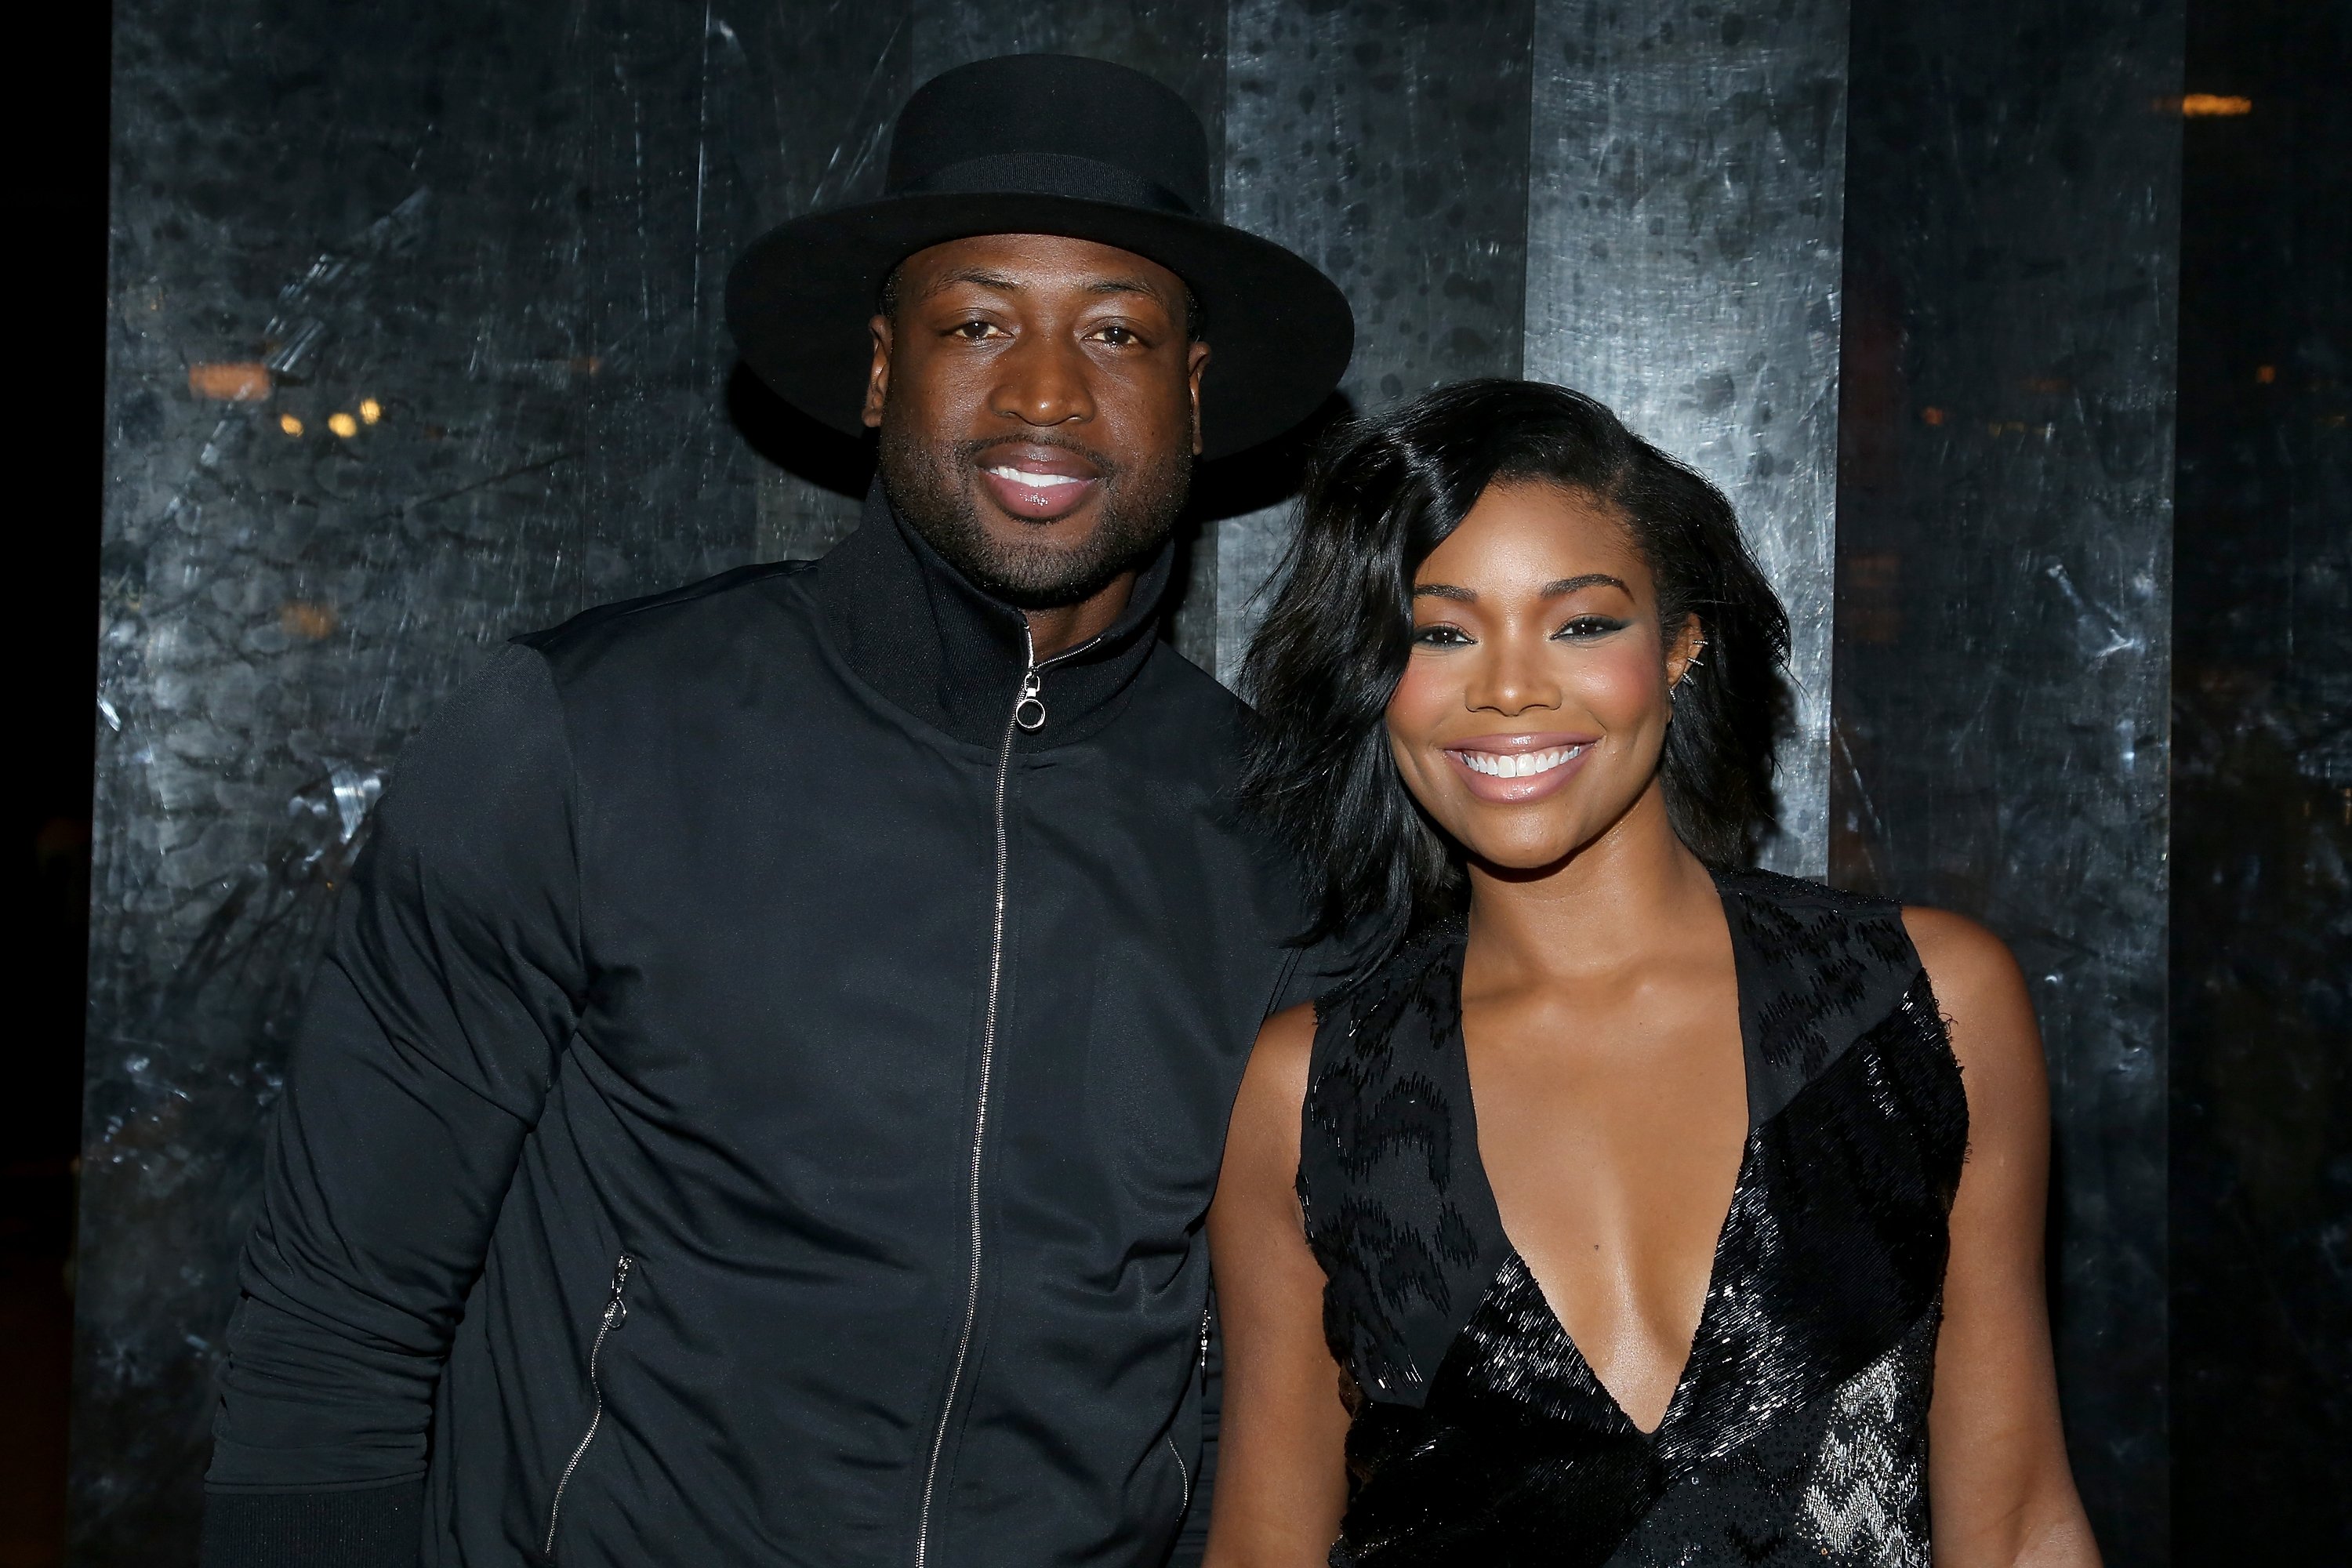 Gabrielle Union and Dwyane Wade at the Spring 2016 New York Fashion Week on September 13, 2015 in New York City.| Source: Getty Images